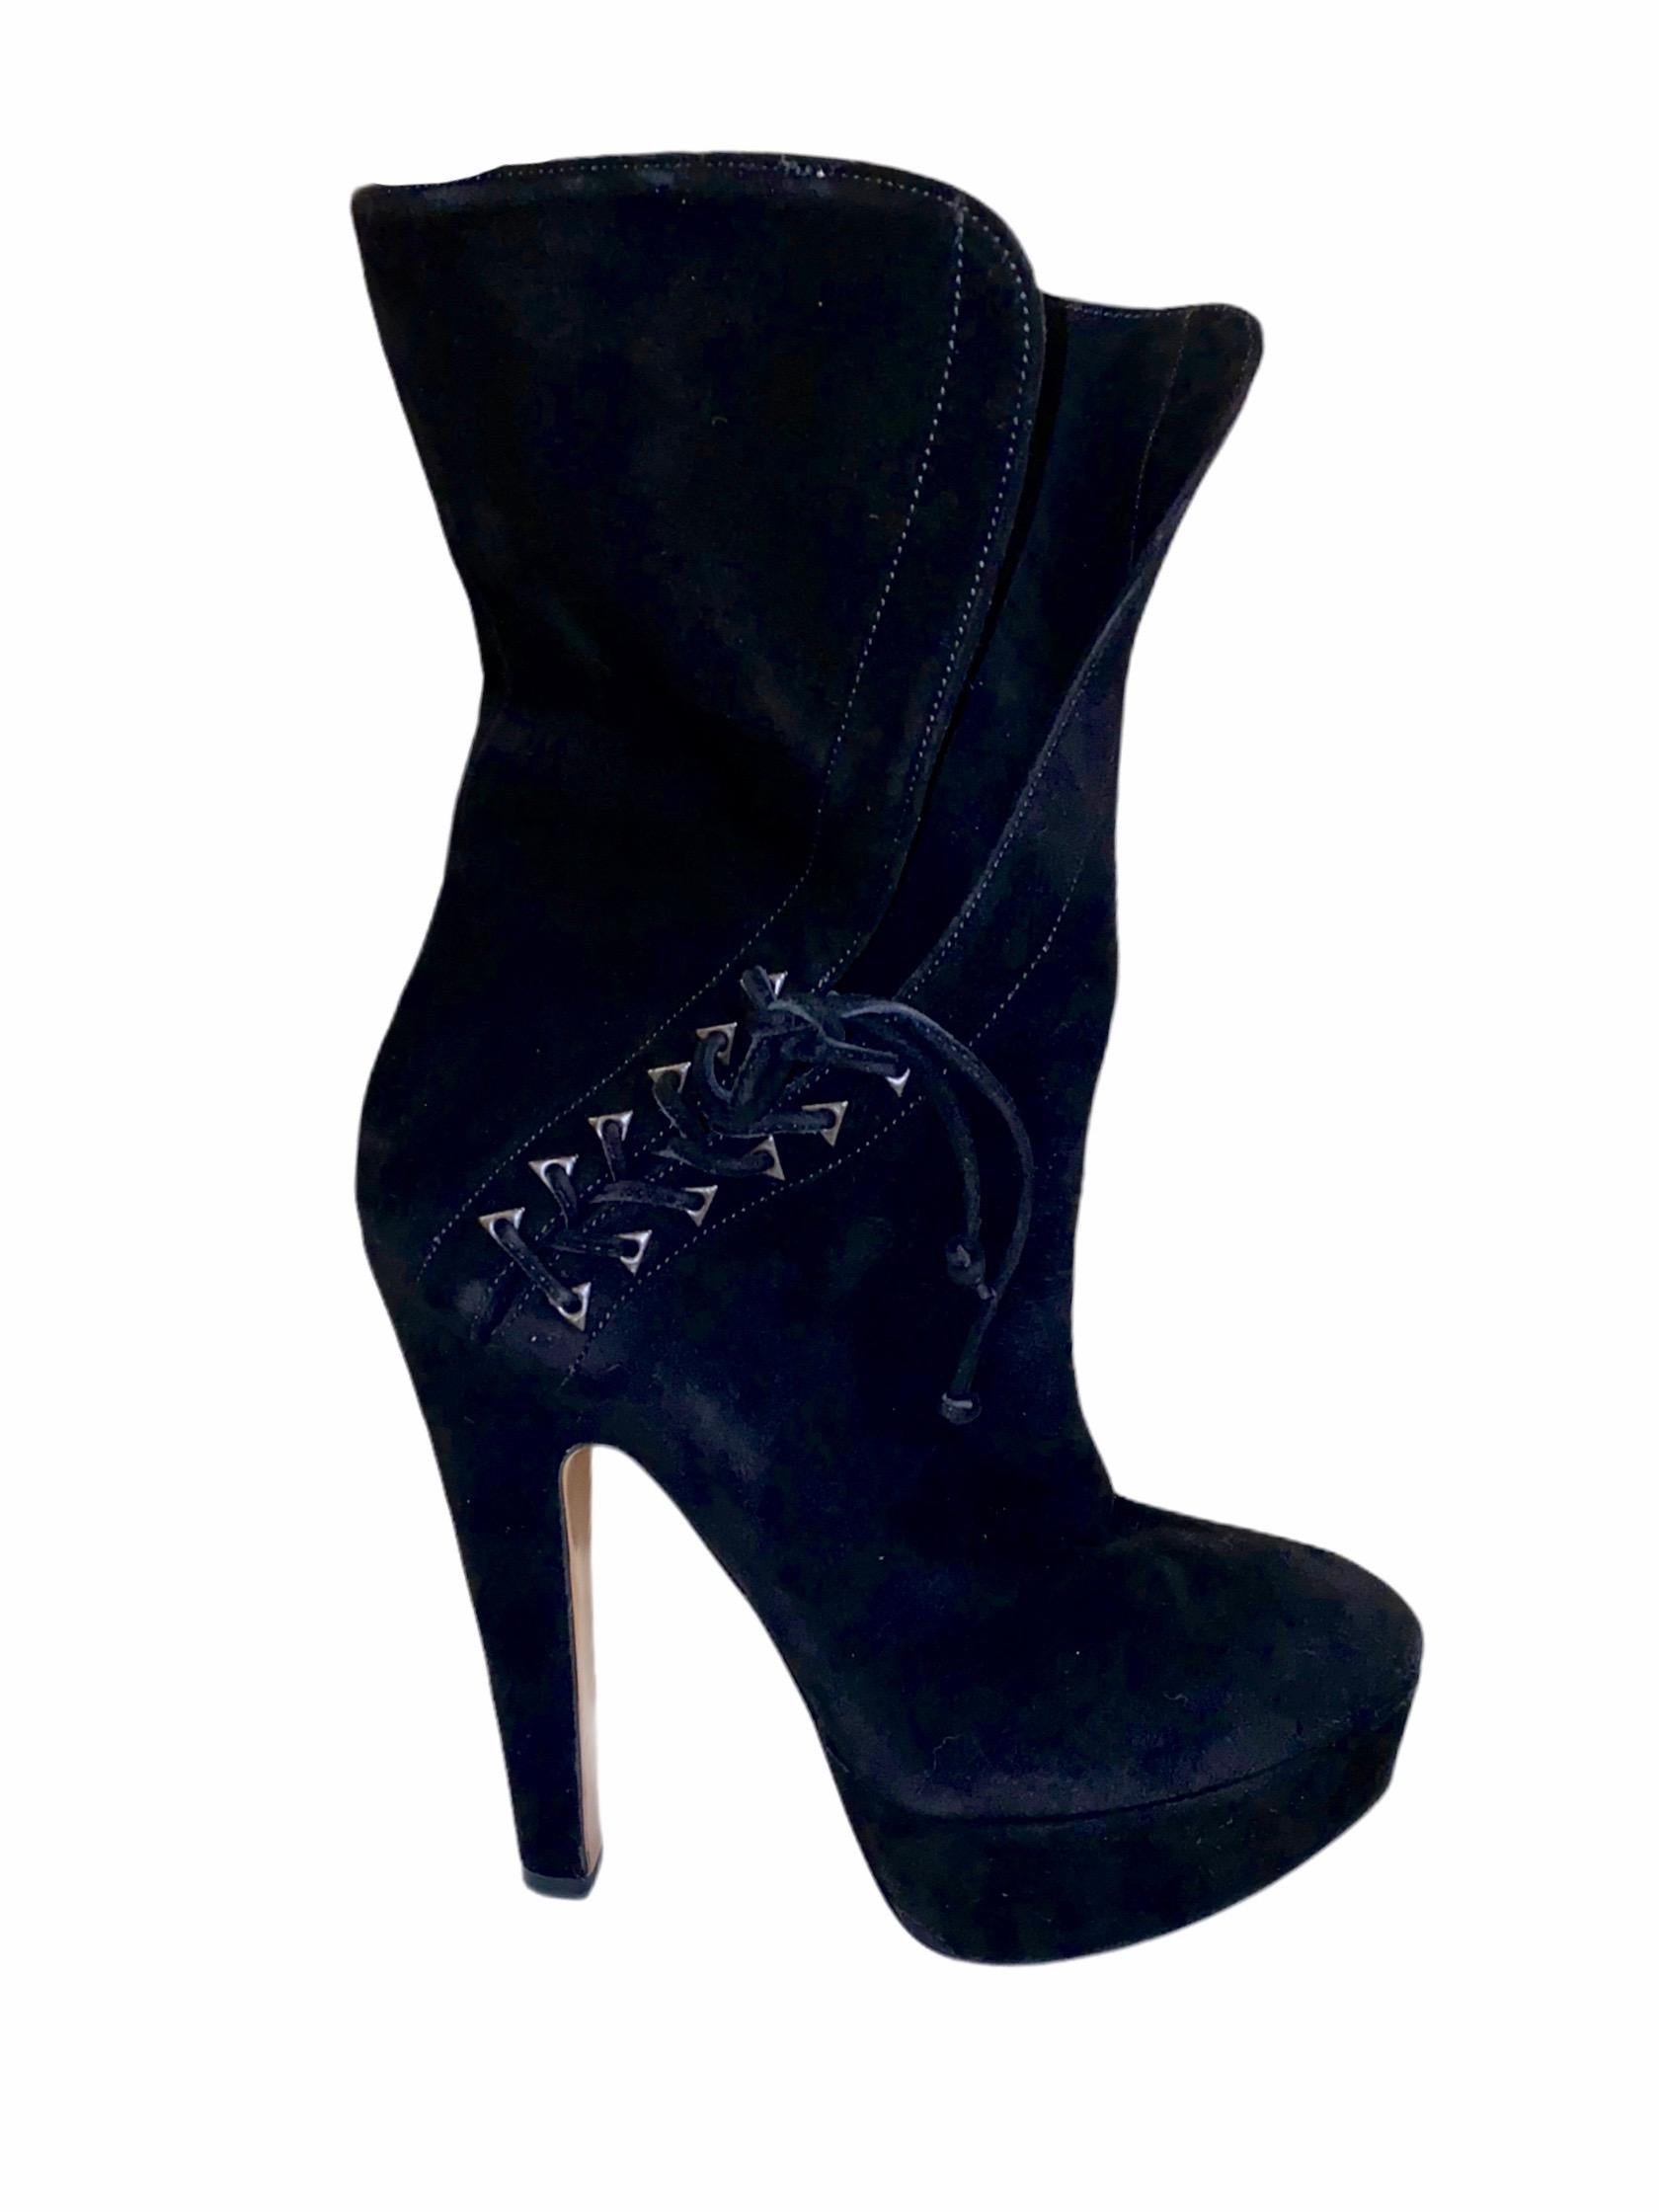 An AZZEDINE ALAIA classic signature piece that will last you for years
This gorgeous pair of booties are made out of finest black suede with lace up details at ankles
Size 37.5
Made in Italy
RRP is 2599$ plus taxes
Unworn, comes with ALAIA dustbag